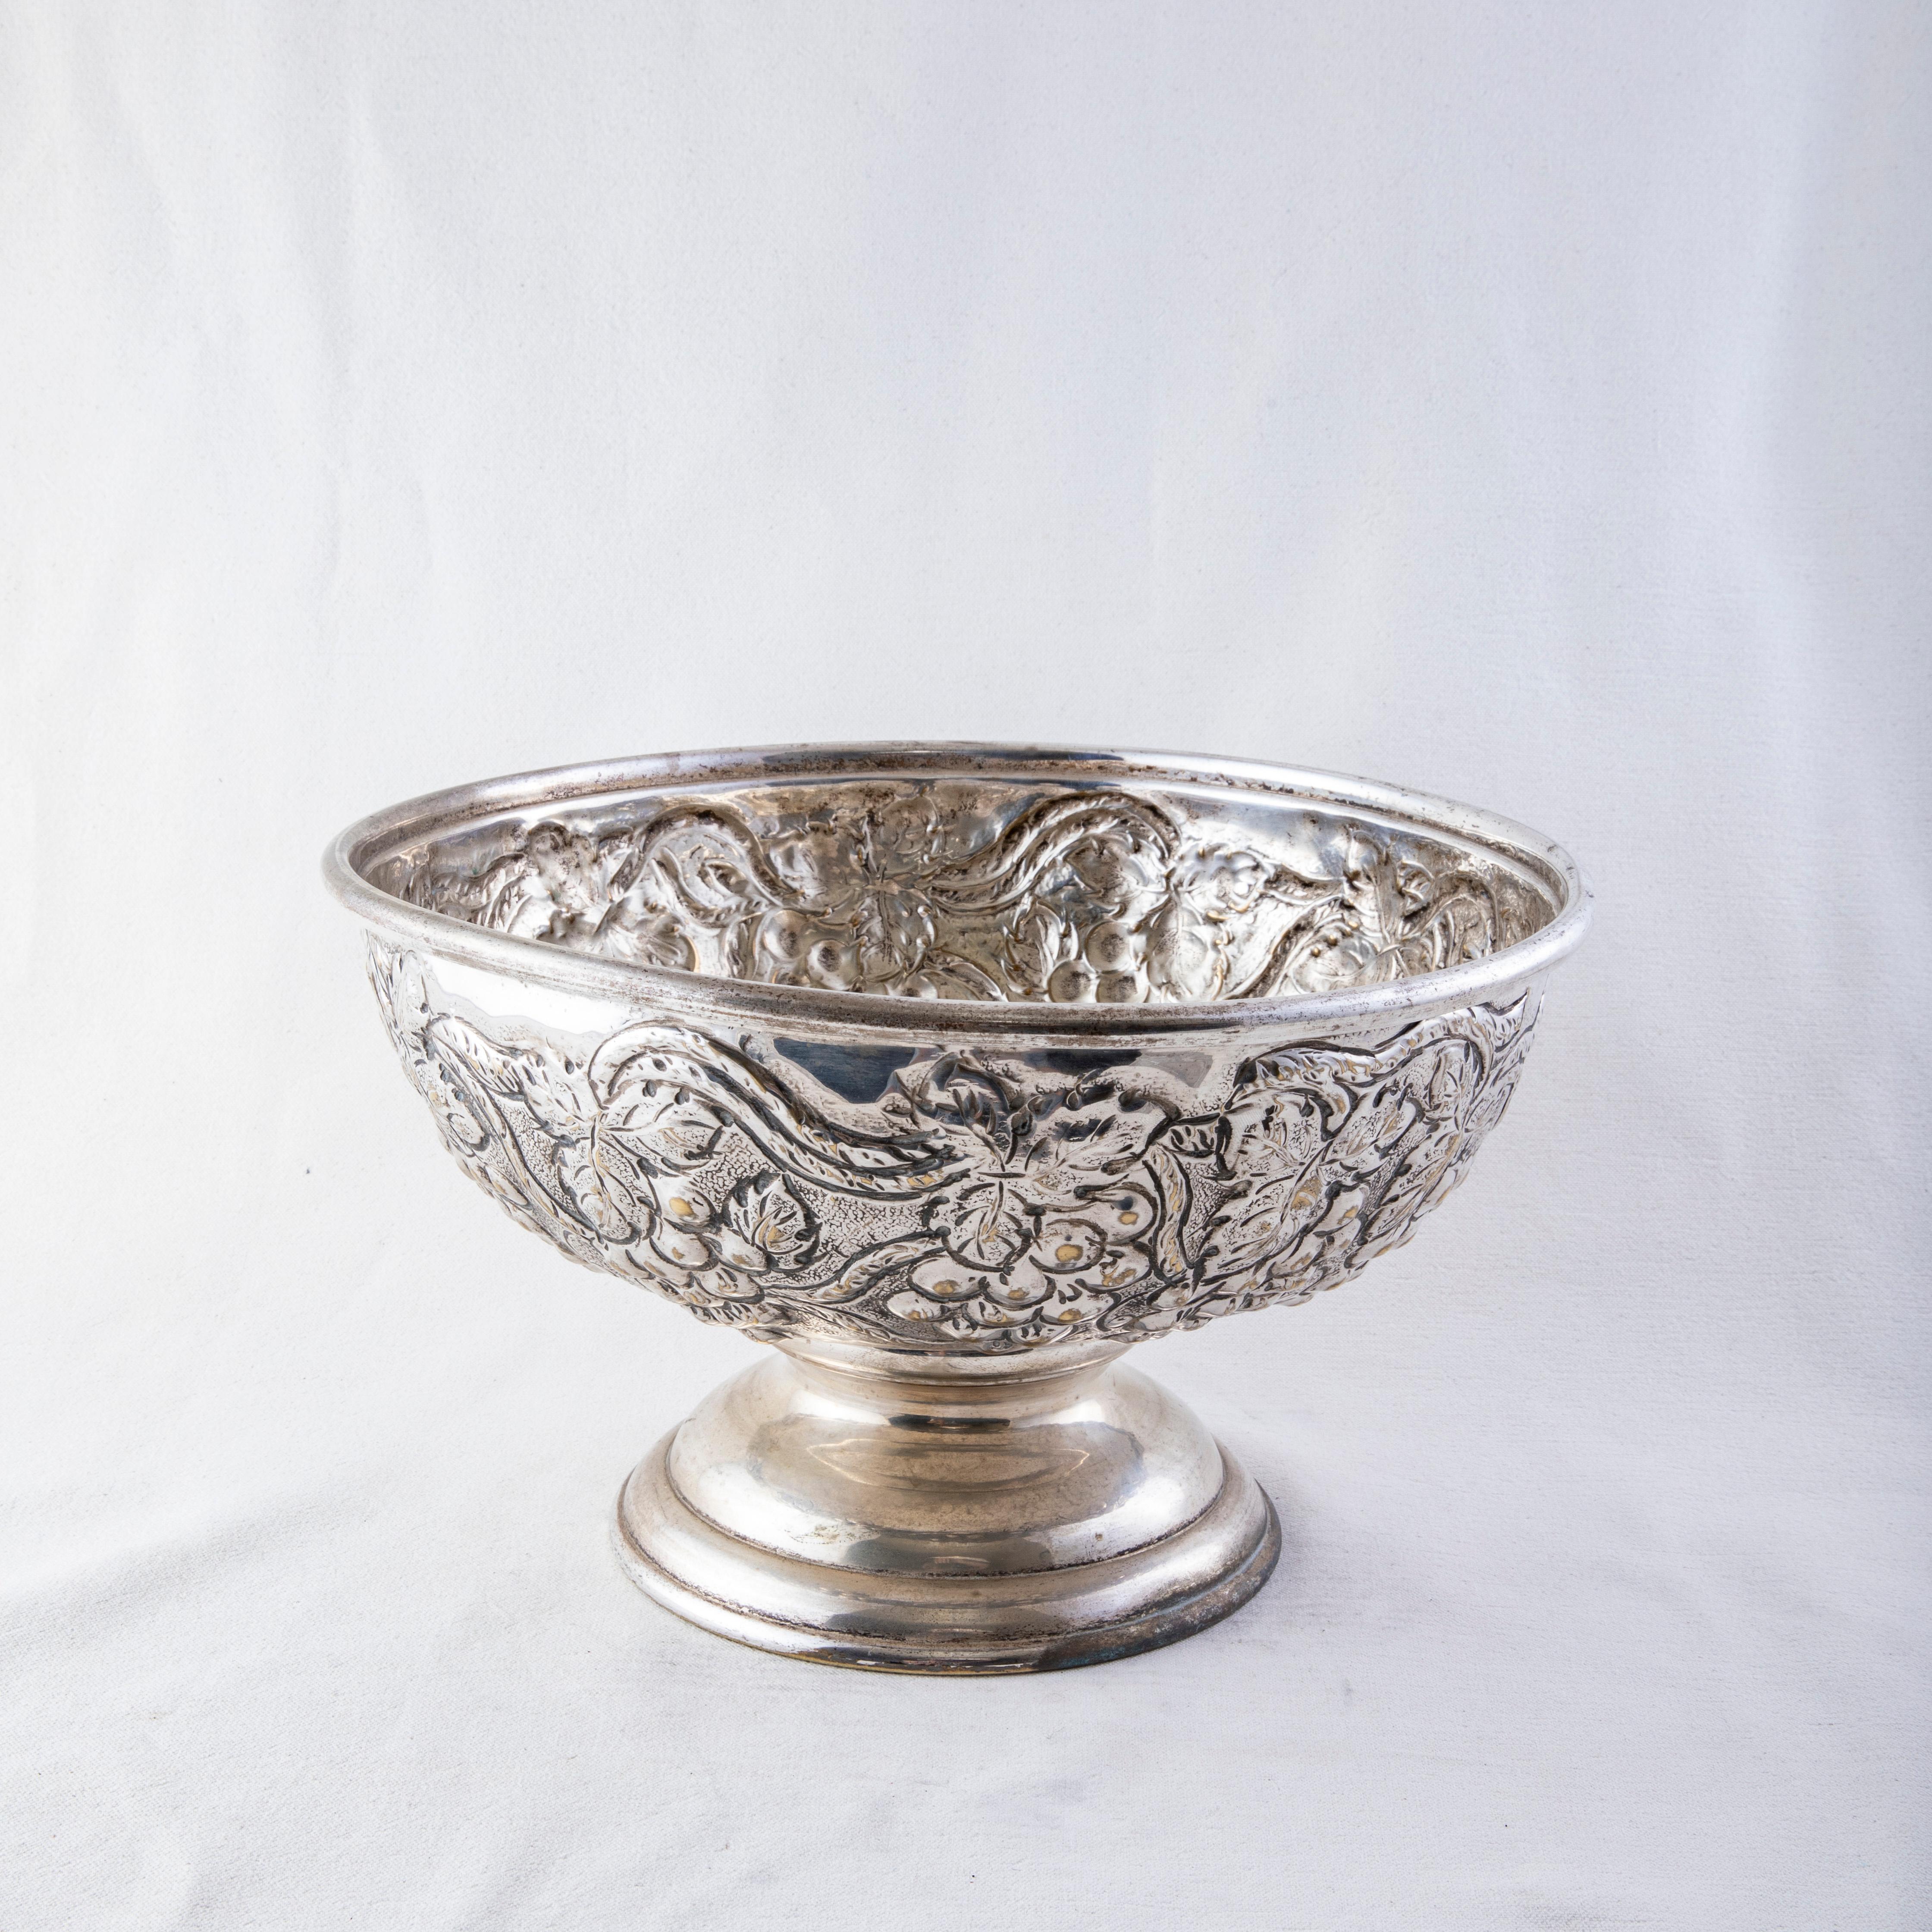 This large mid-twentieth century Italian hotel champagne bucket features a hand hammered repousse grapes and grape leaf motif. The bucket rests on a footed base and can accommodate up to three bottles. A quintessential bar piece, this large